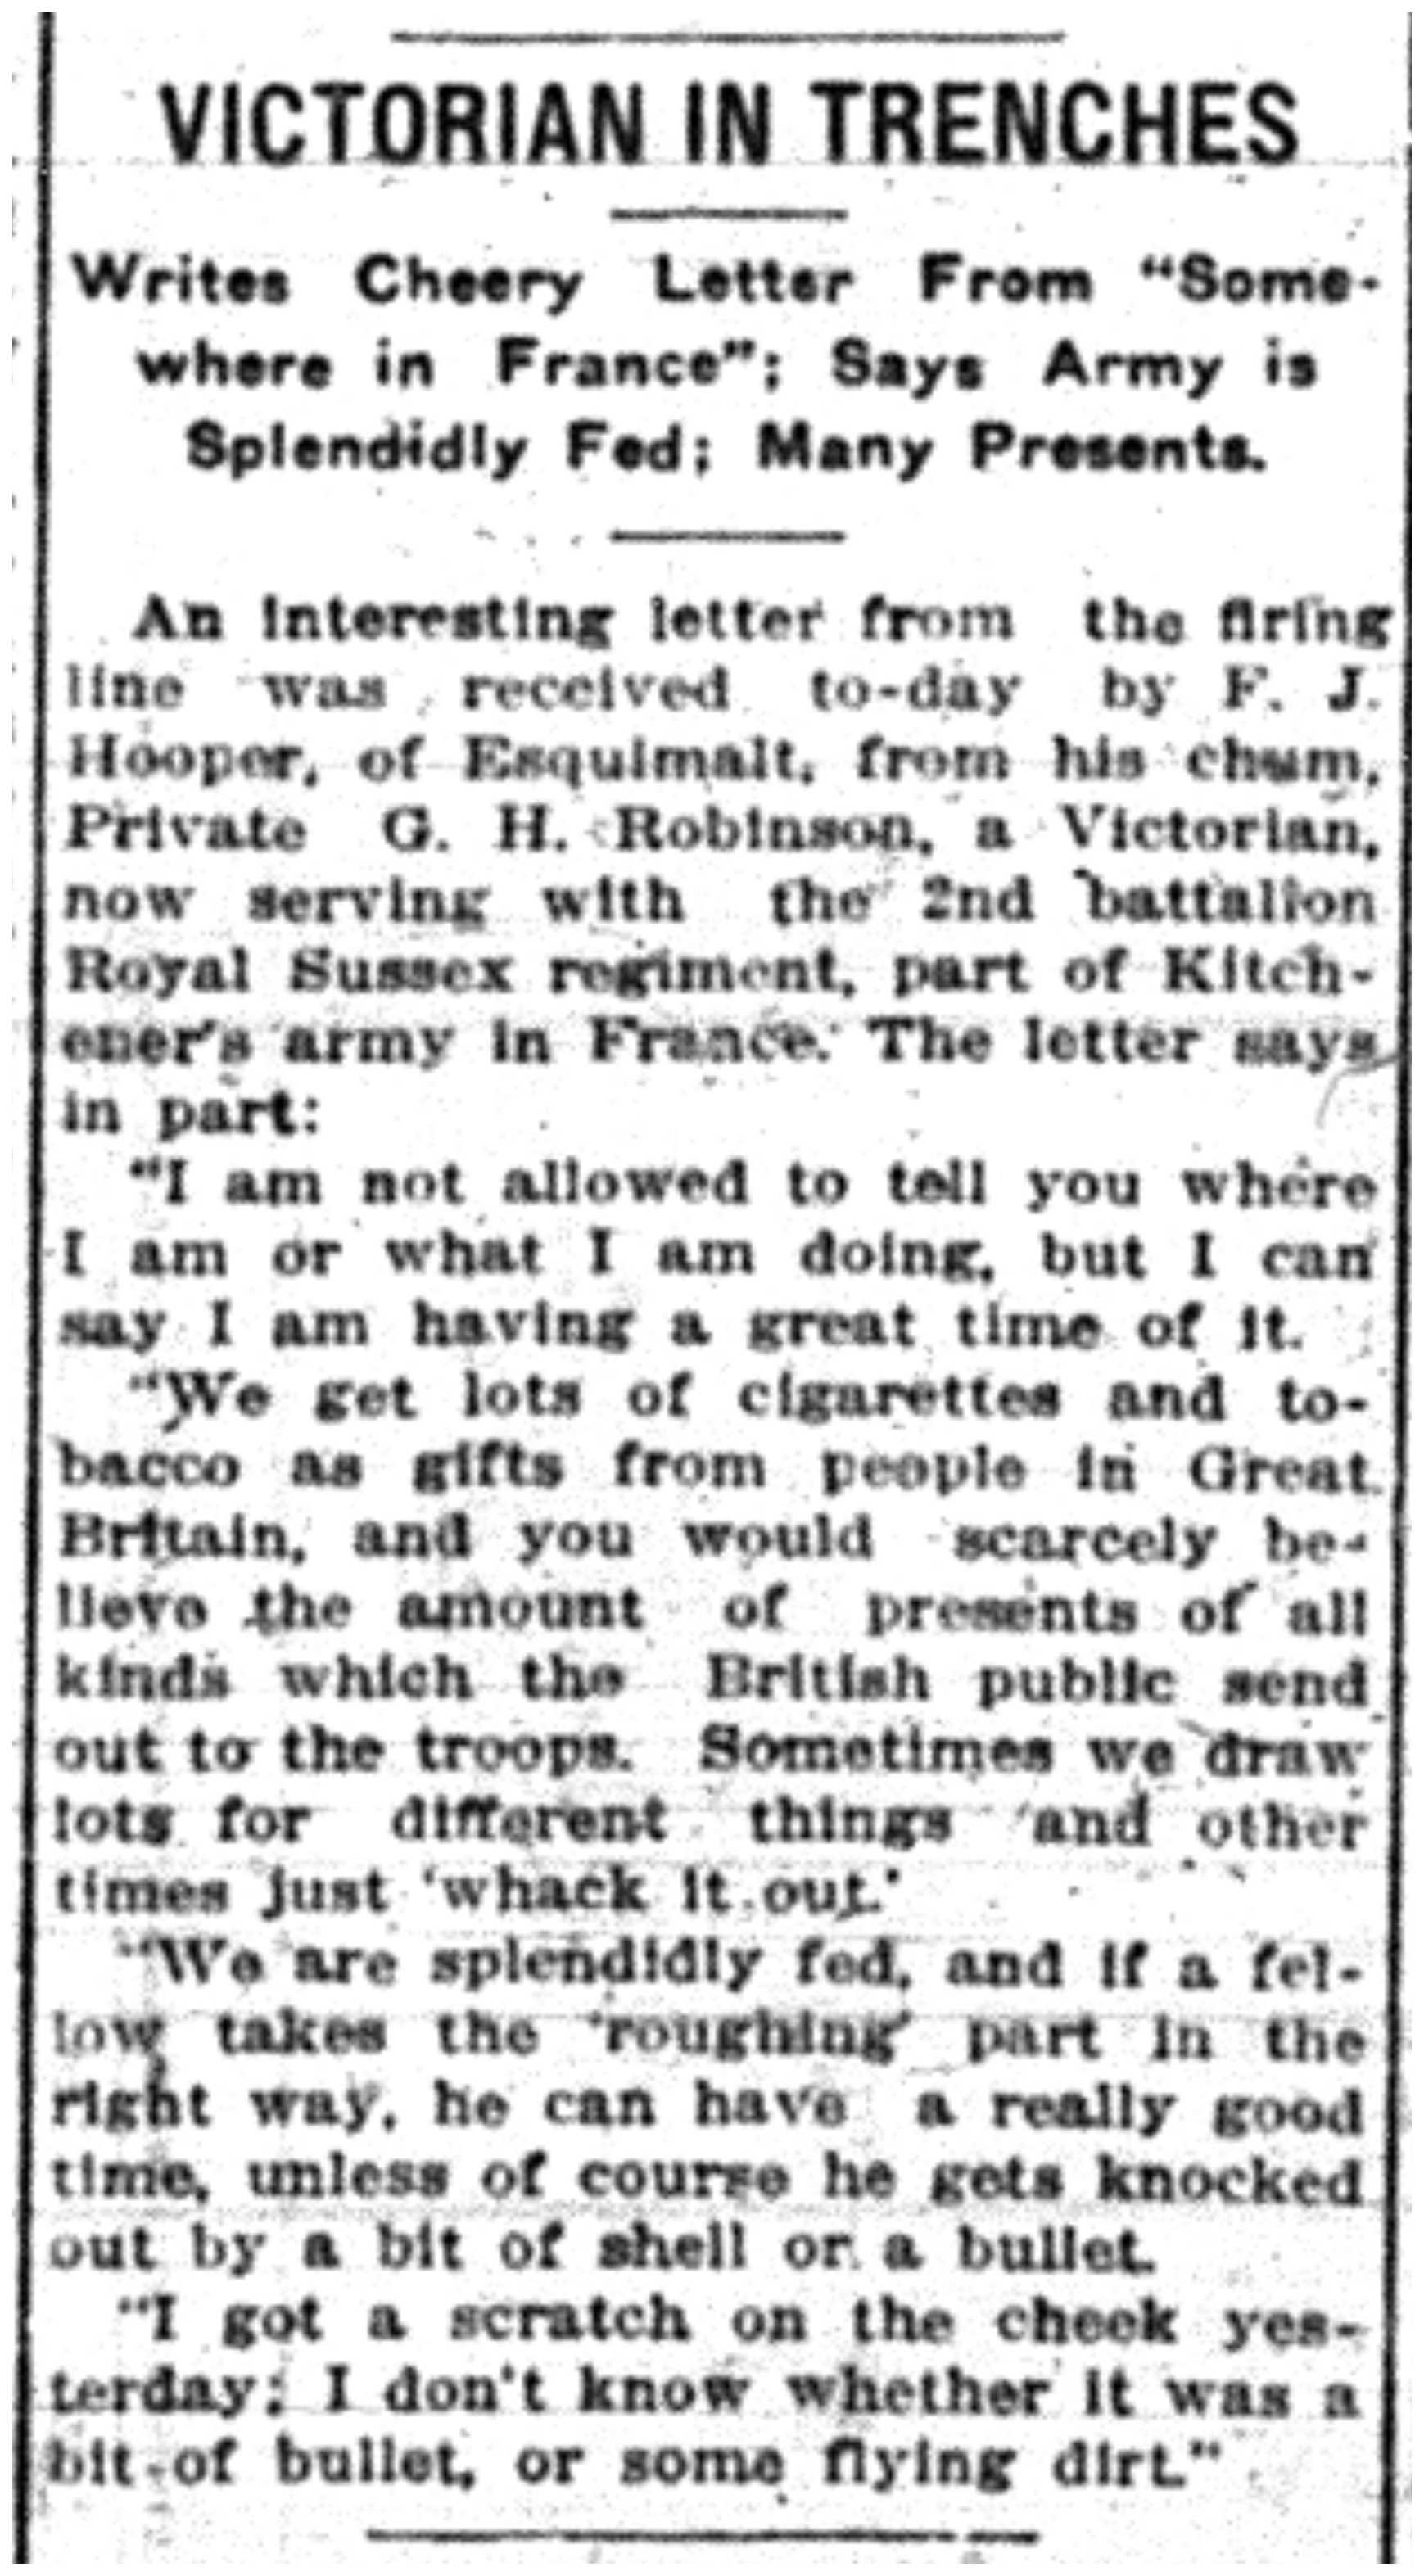 Victorian in Trenches Writes Letter Home